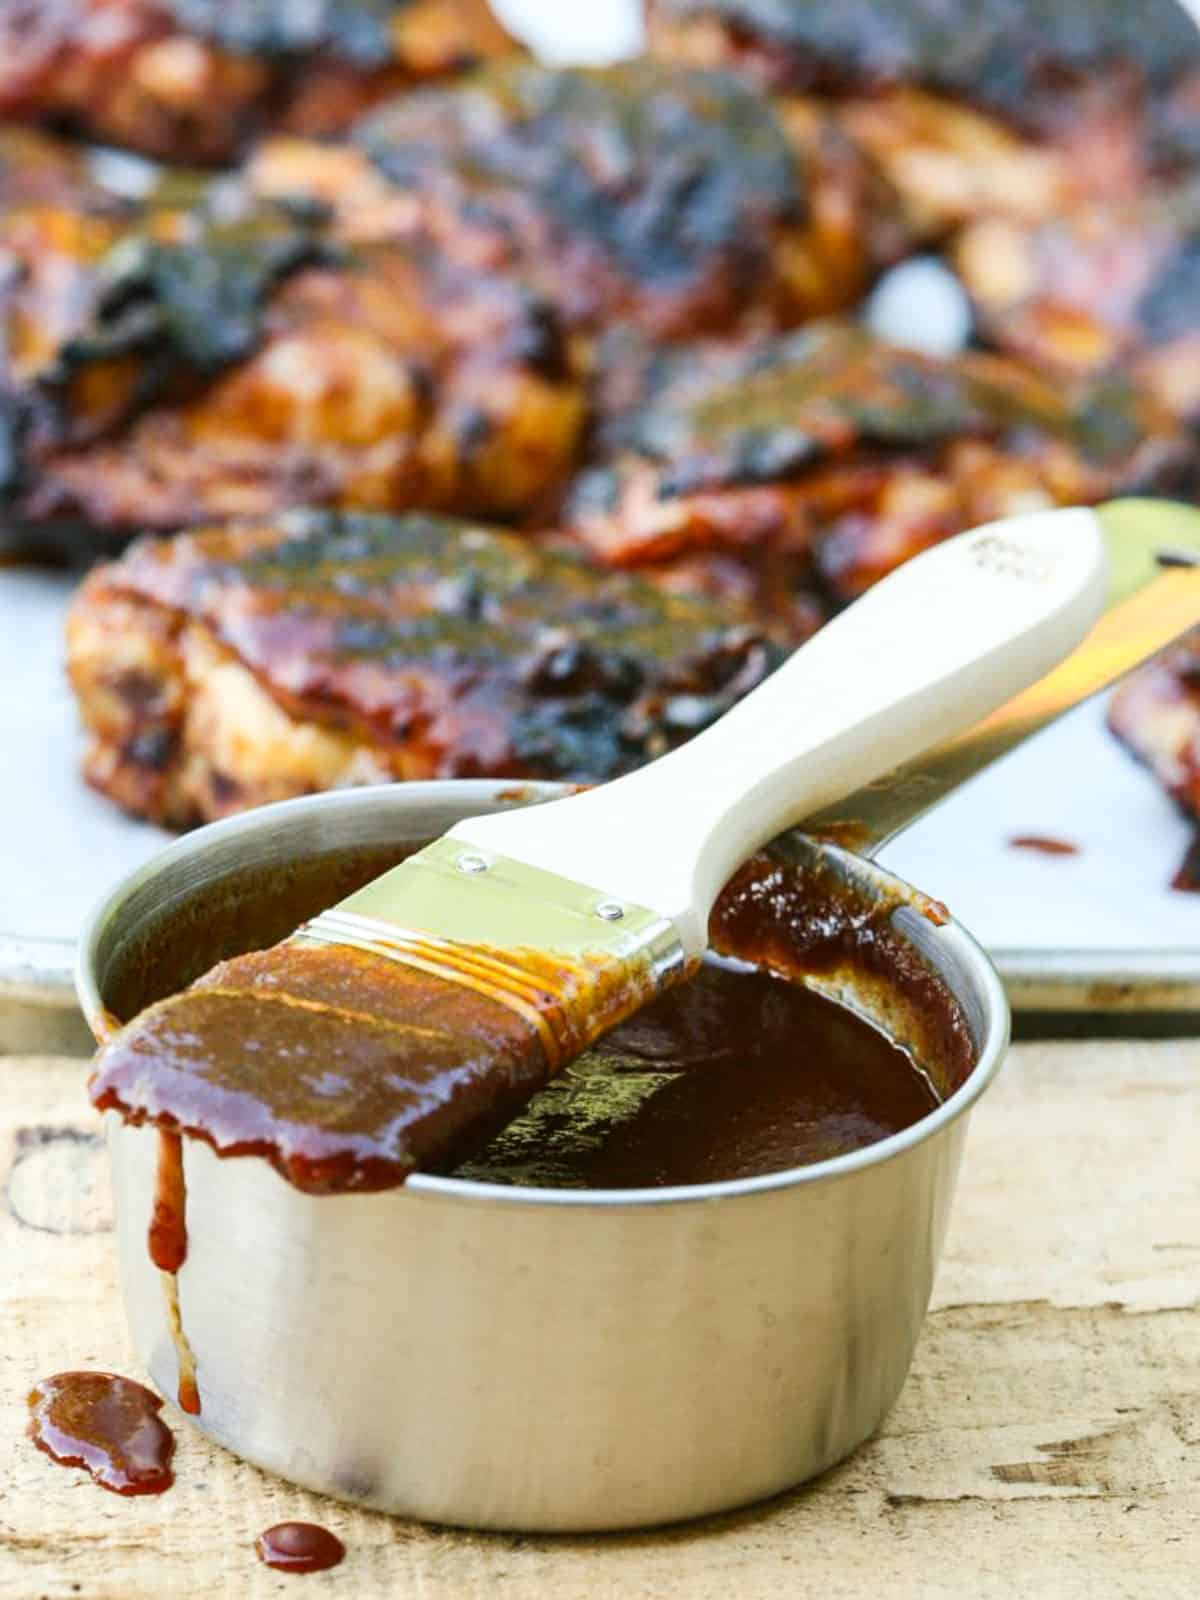 A silver container filled with bbq sauce, and a brush dripping with the sauce.